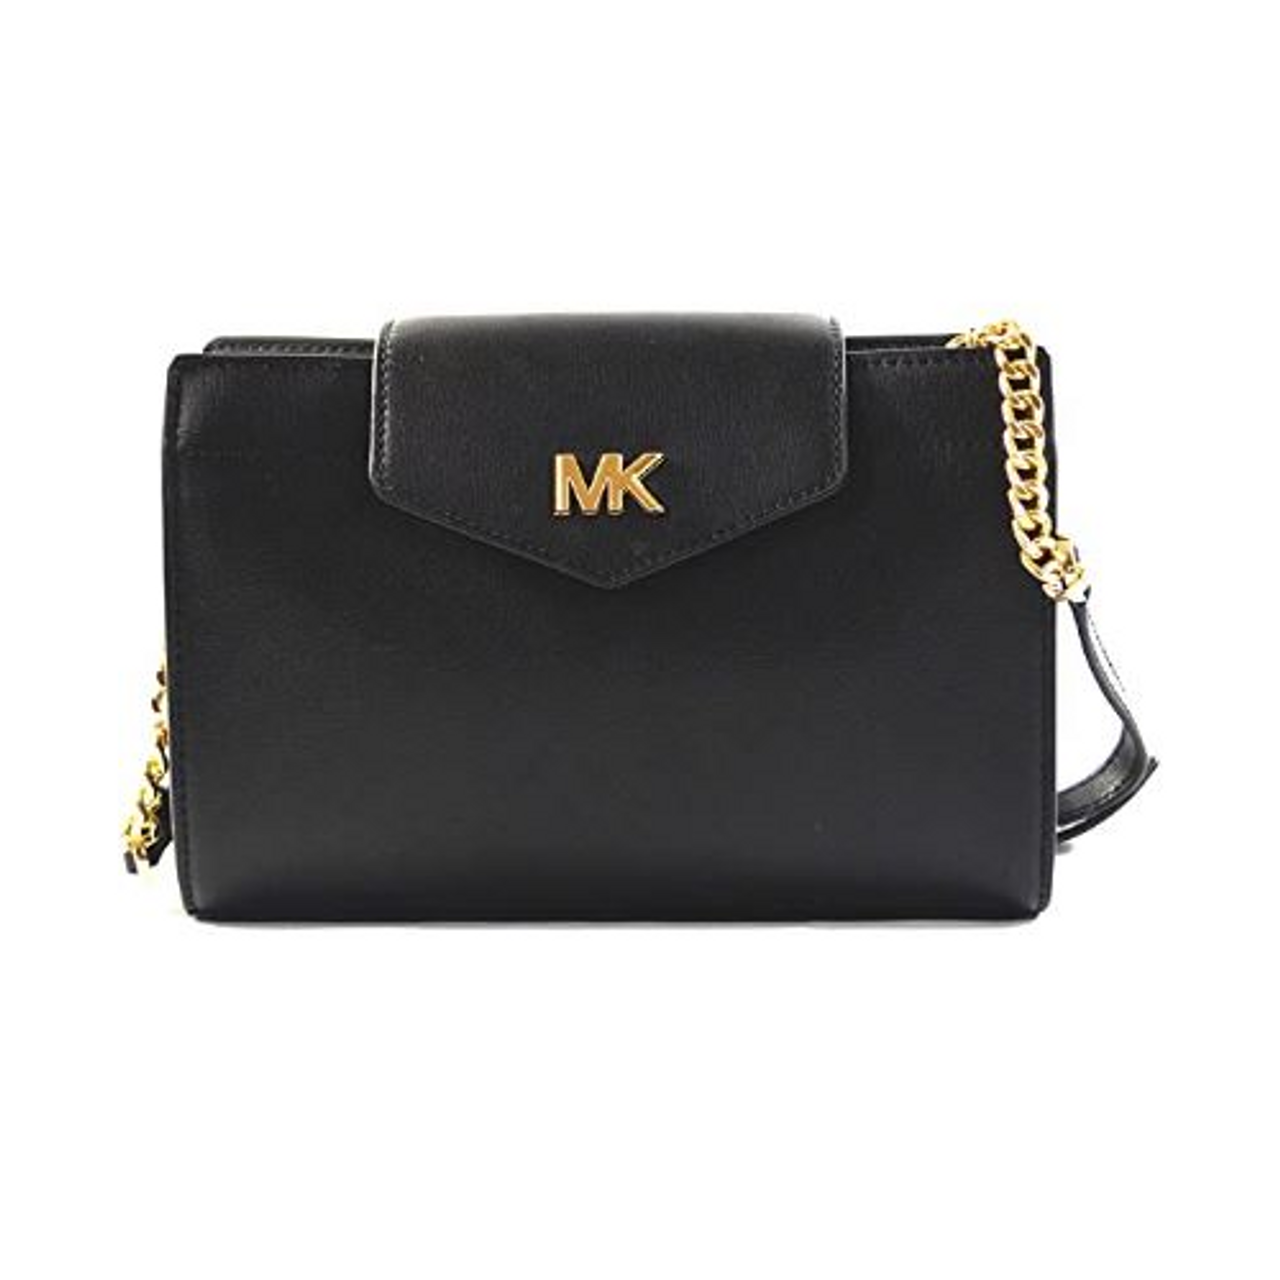 Michael Kors Gilly Large Jet Set Drawstring Top Zip Tote Black Saffiano  Leather : Clothing, Shoes & Jewelry - Amazon.com